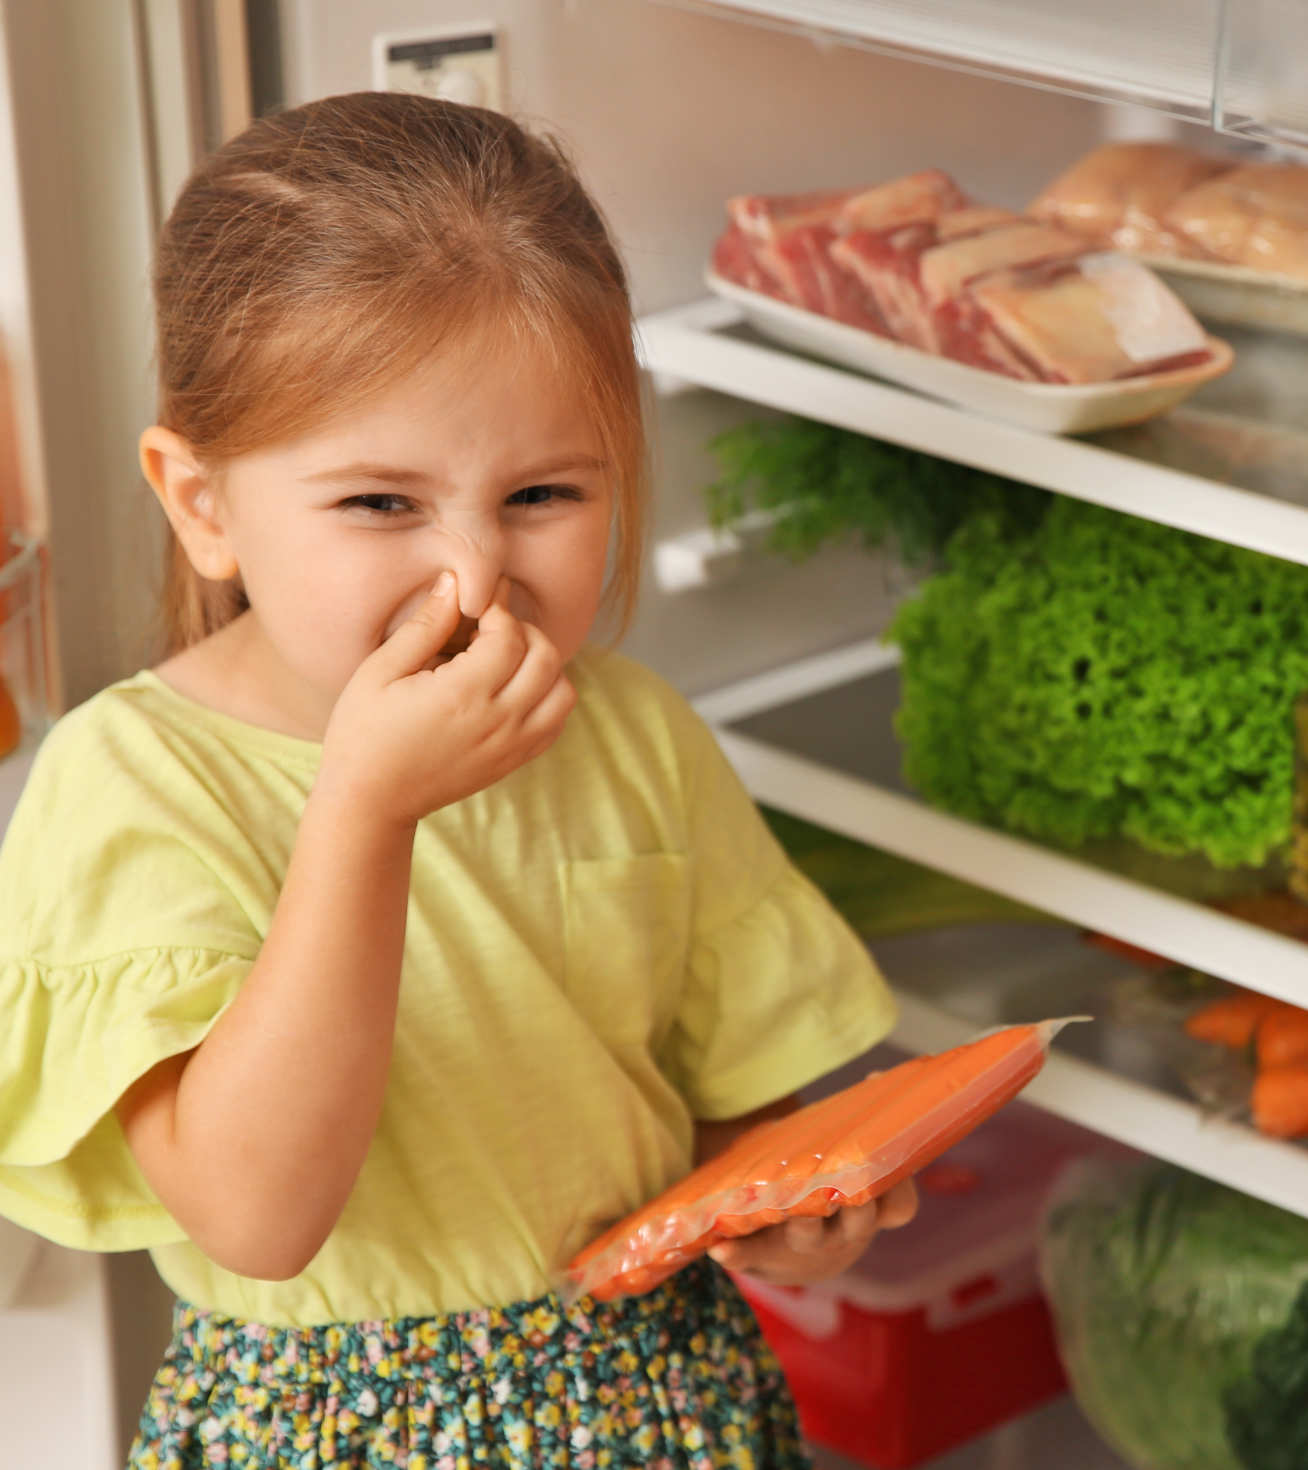 Photo of little girl next to open fridge holding a packet of sausages and pinching her nose